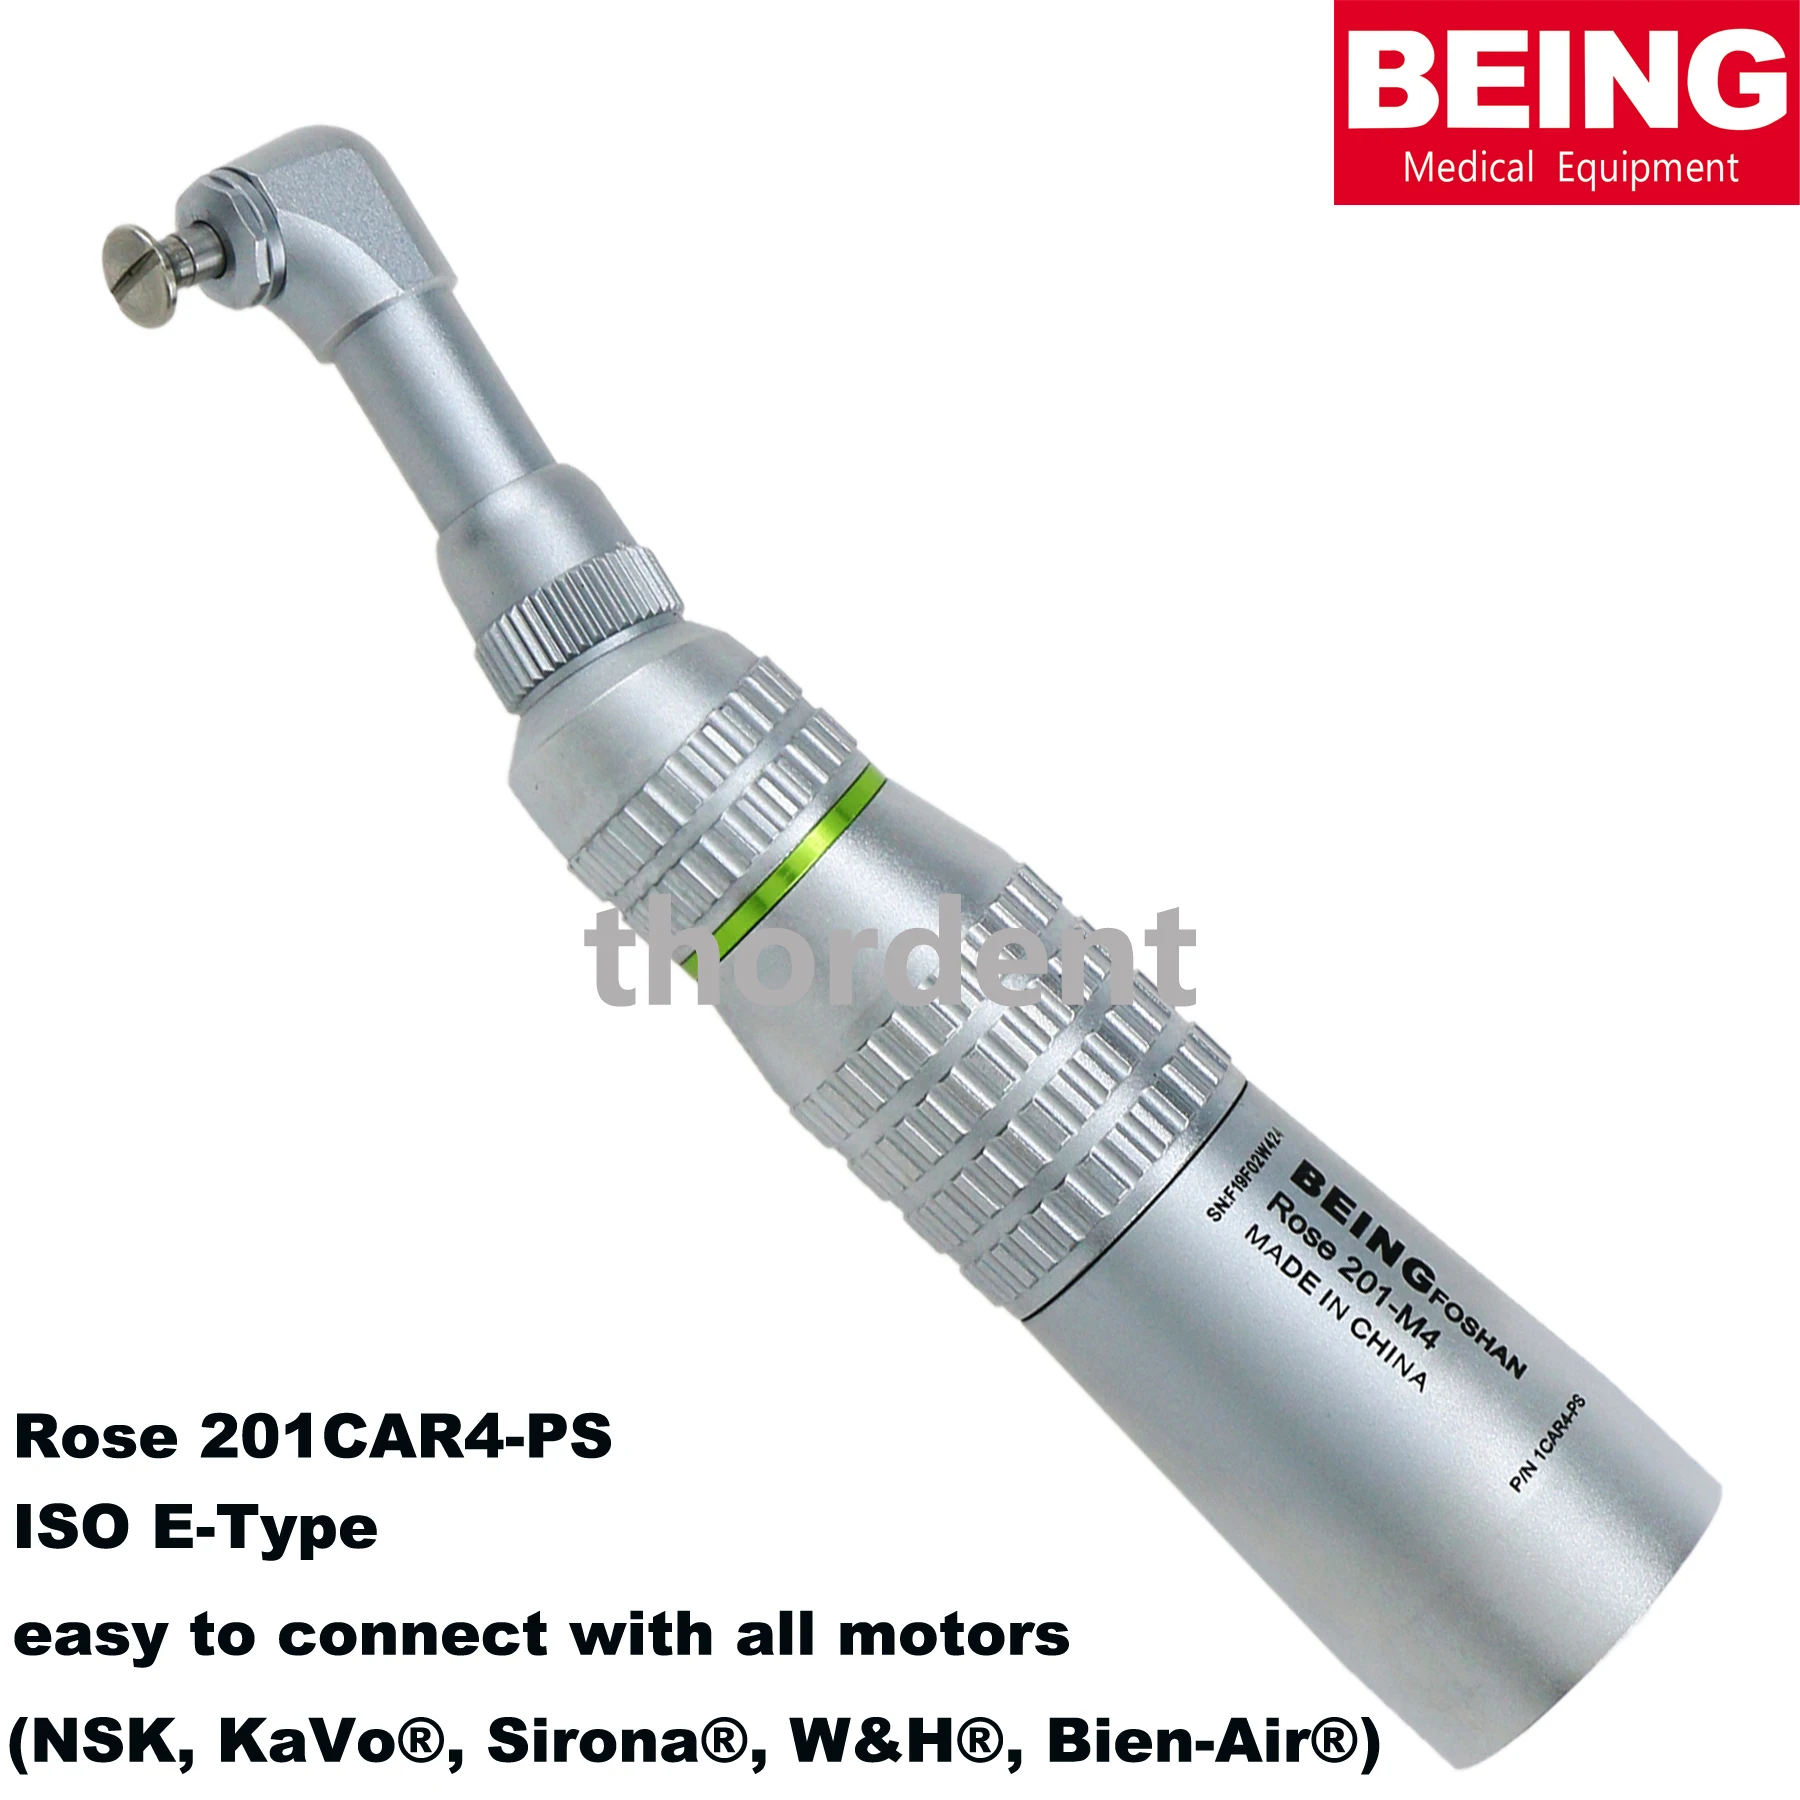 BEING Dental Hygienist 4:1 Contra Angle Prophy Handpiece Snap-on Cup 201CAR4-PS